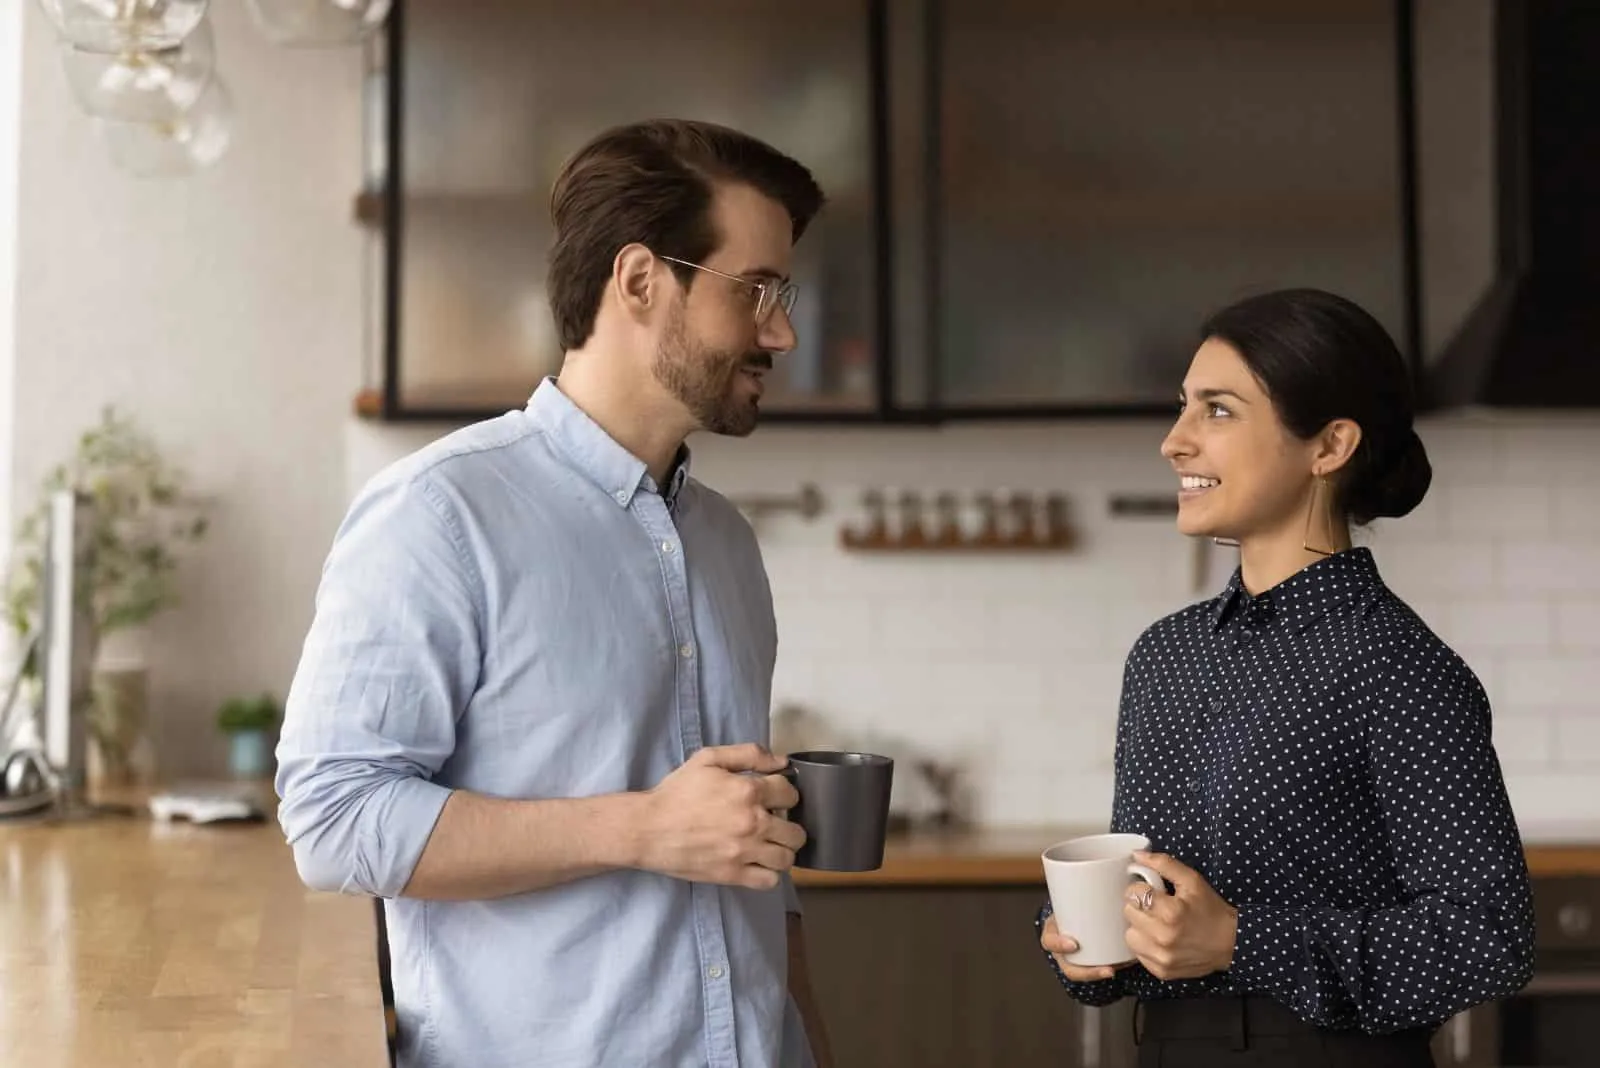 smiling woman talking over coffee with a man at work